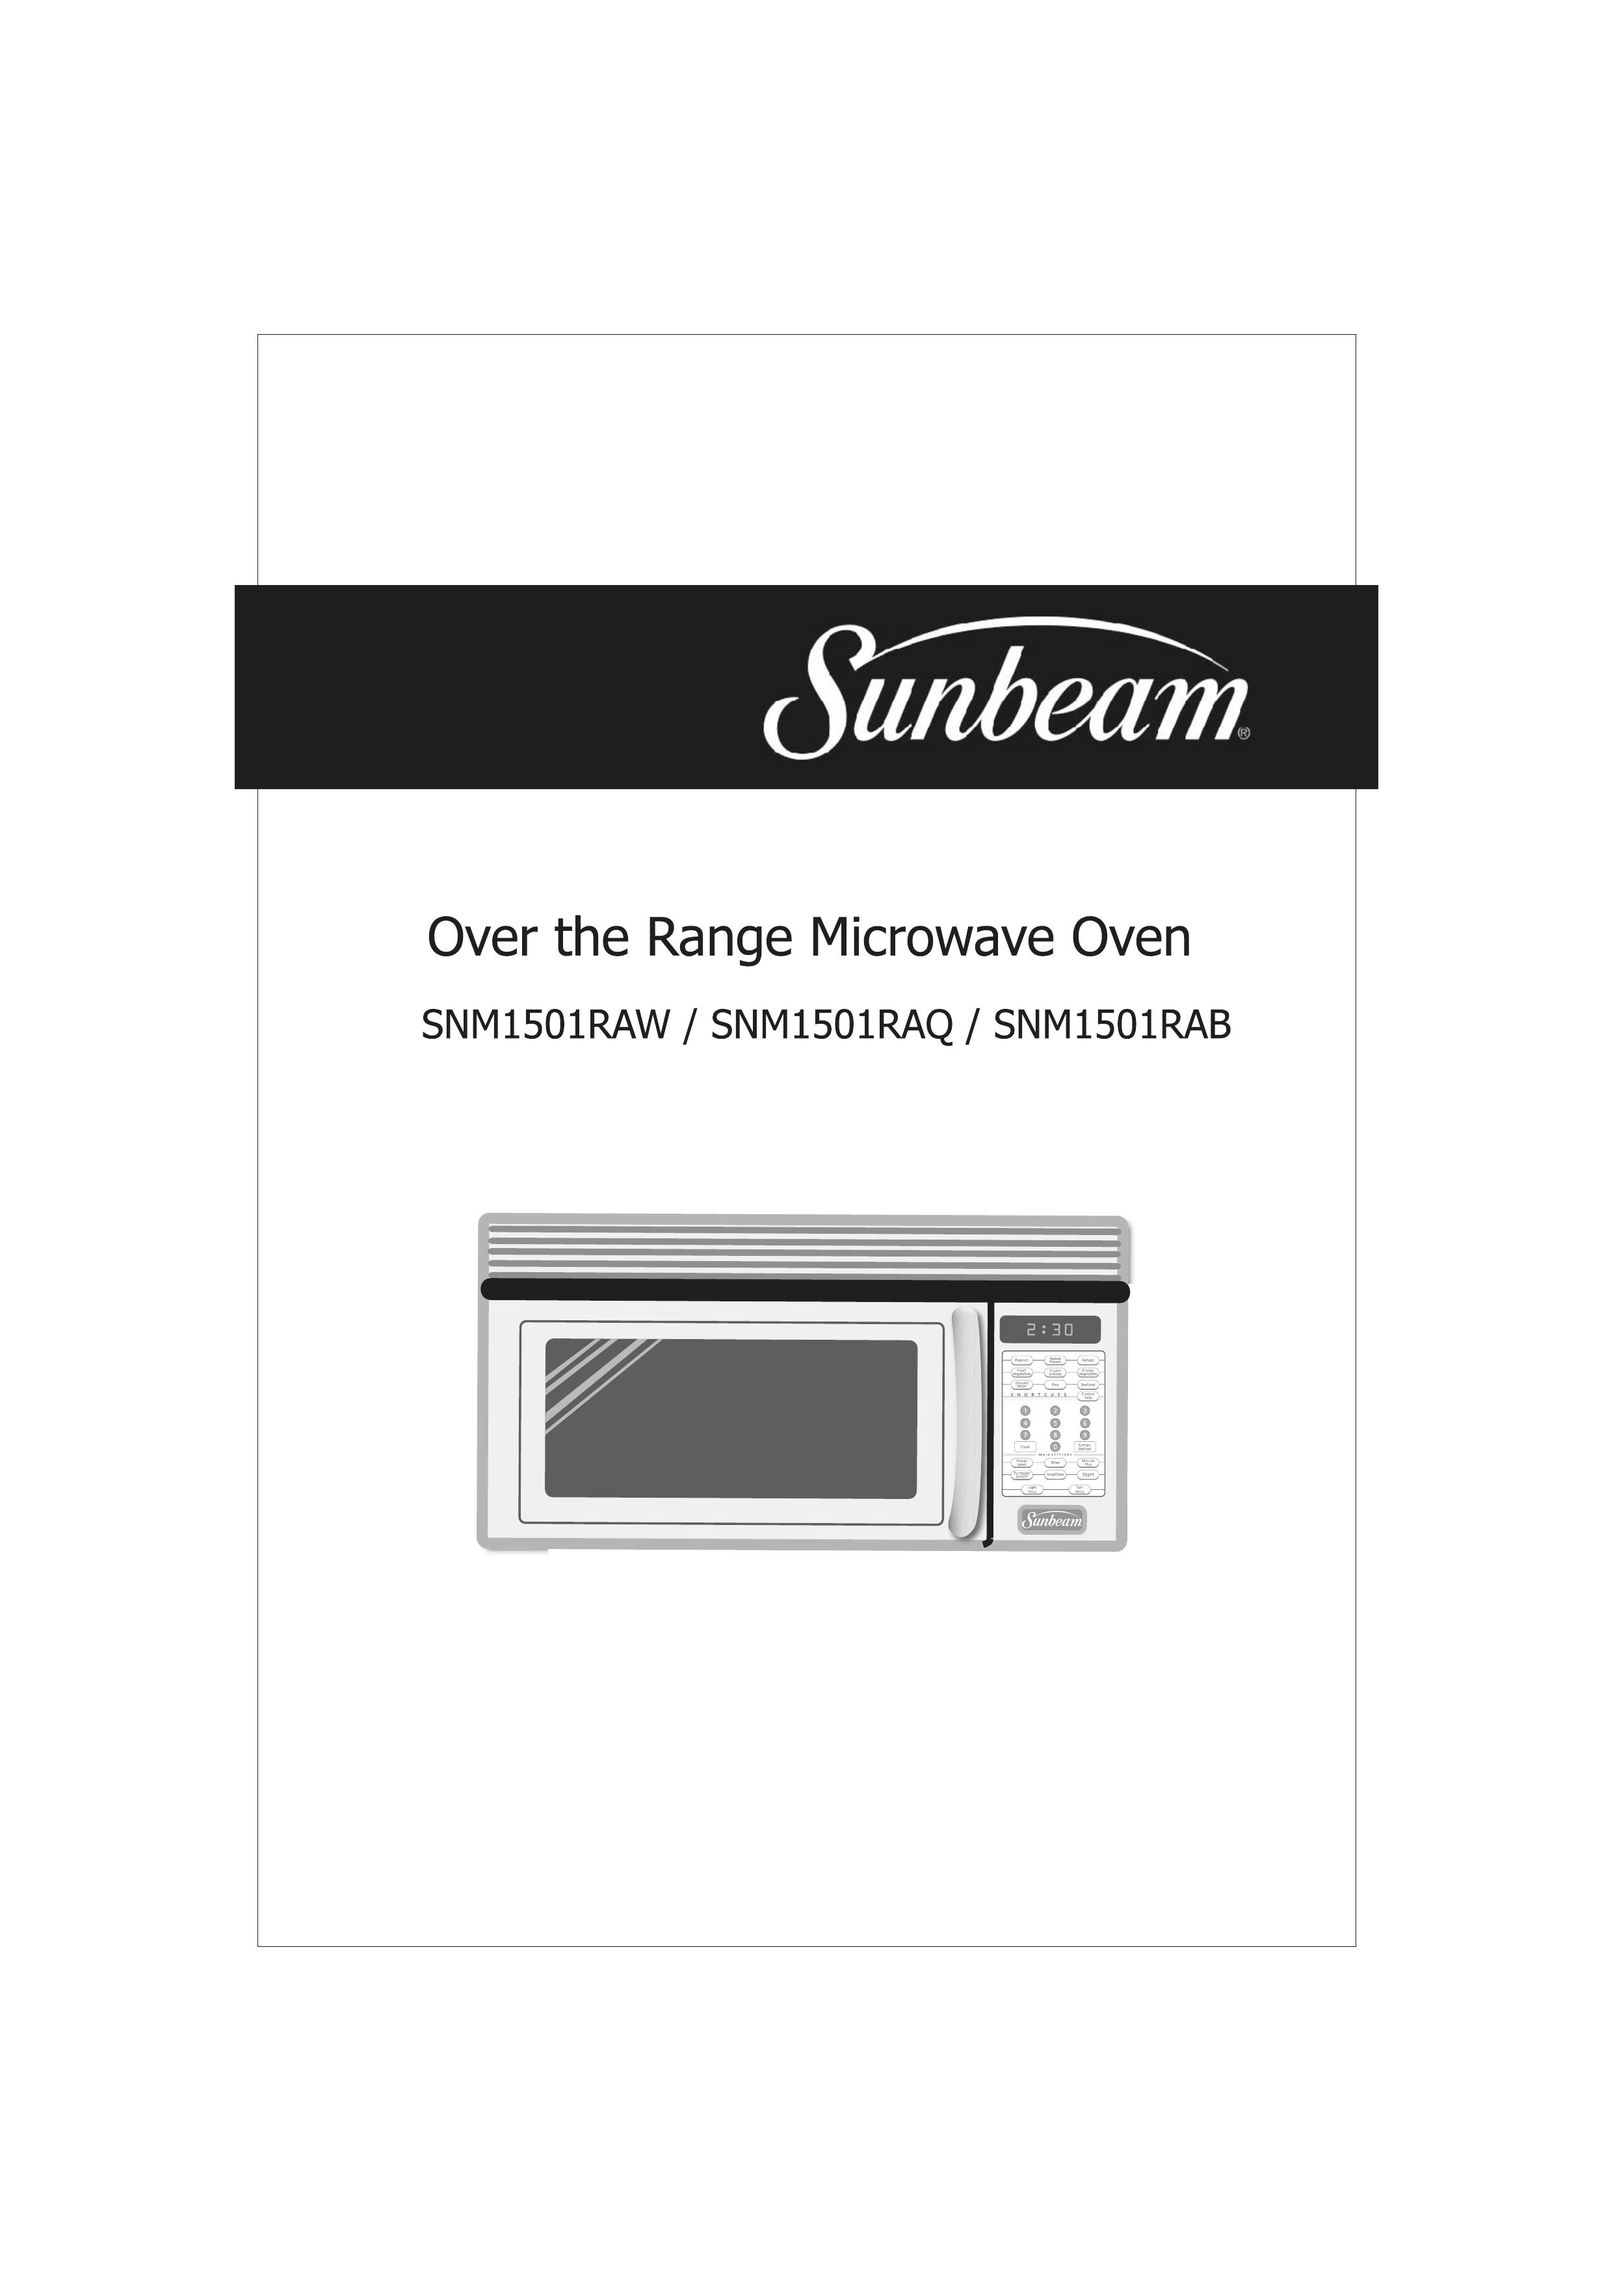 Sunbeam Major Appliances SNM1501RAW Microwave Oven User Manual